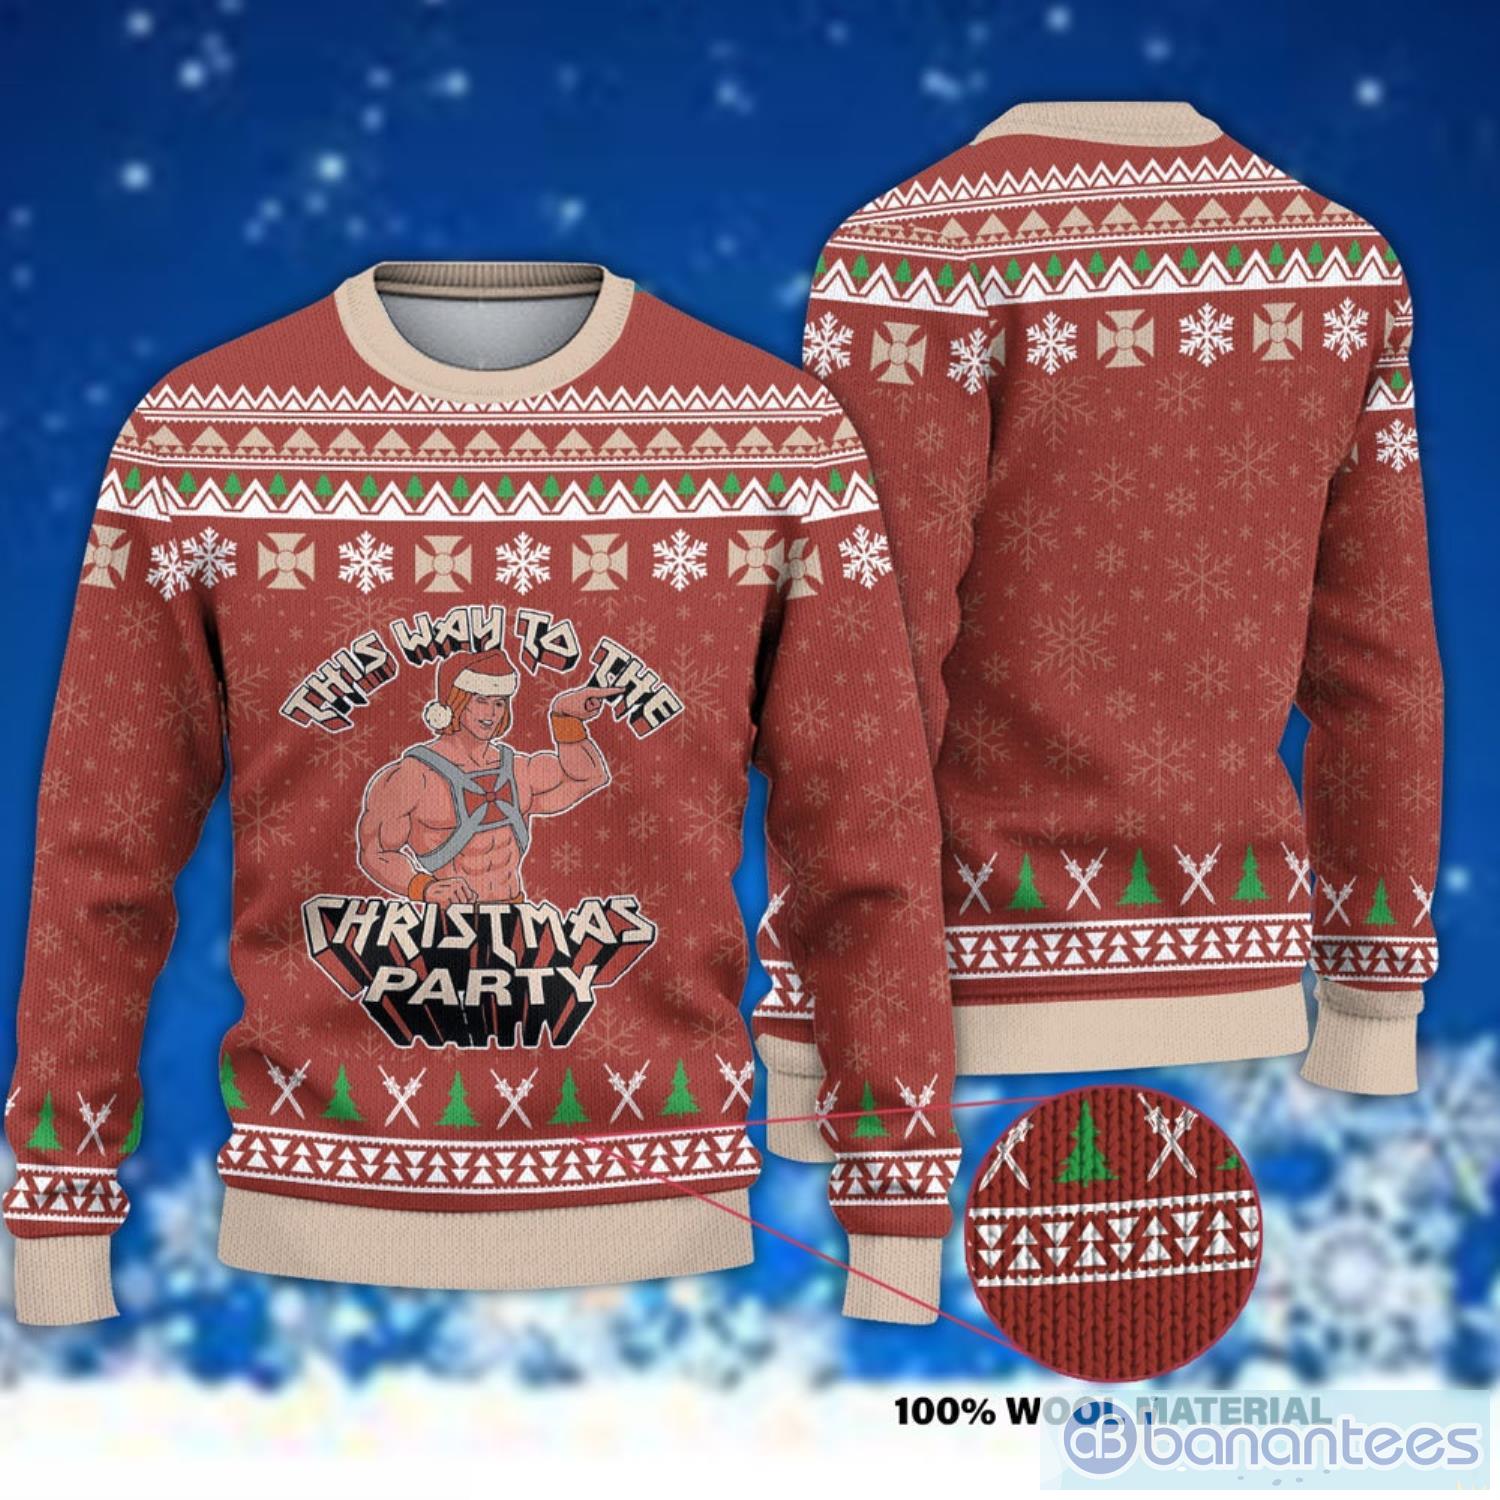 This Way To The Christmas Party He Man Christmas Ugly Sweater He Man Christmas Sweater Product Photo 1